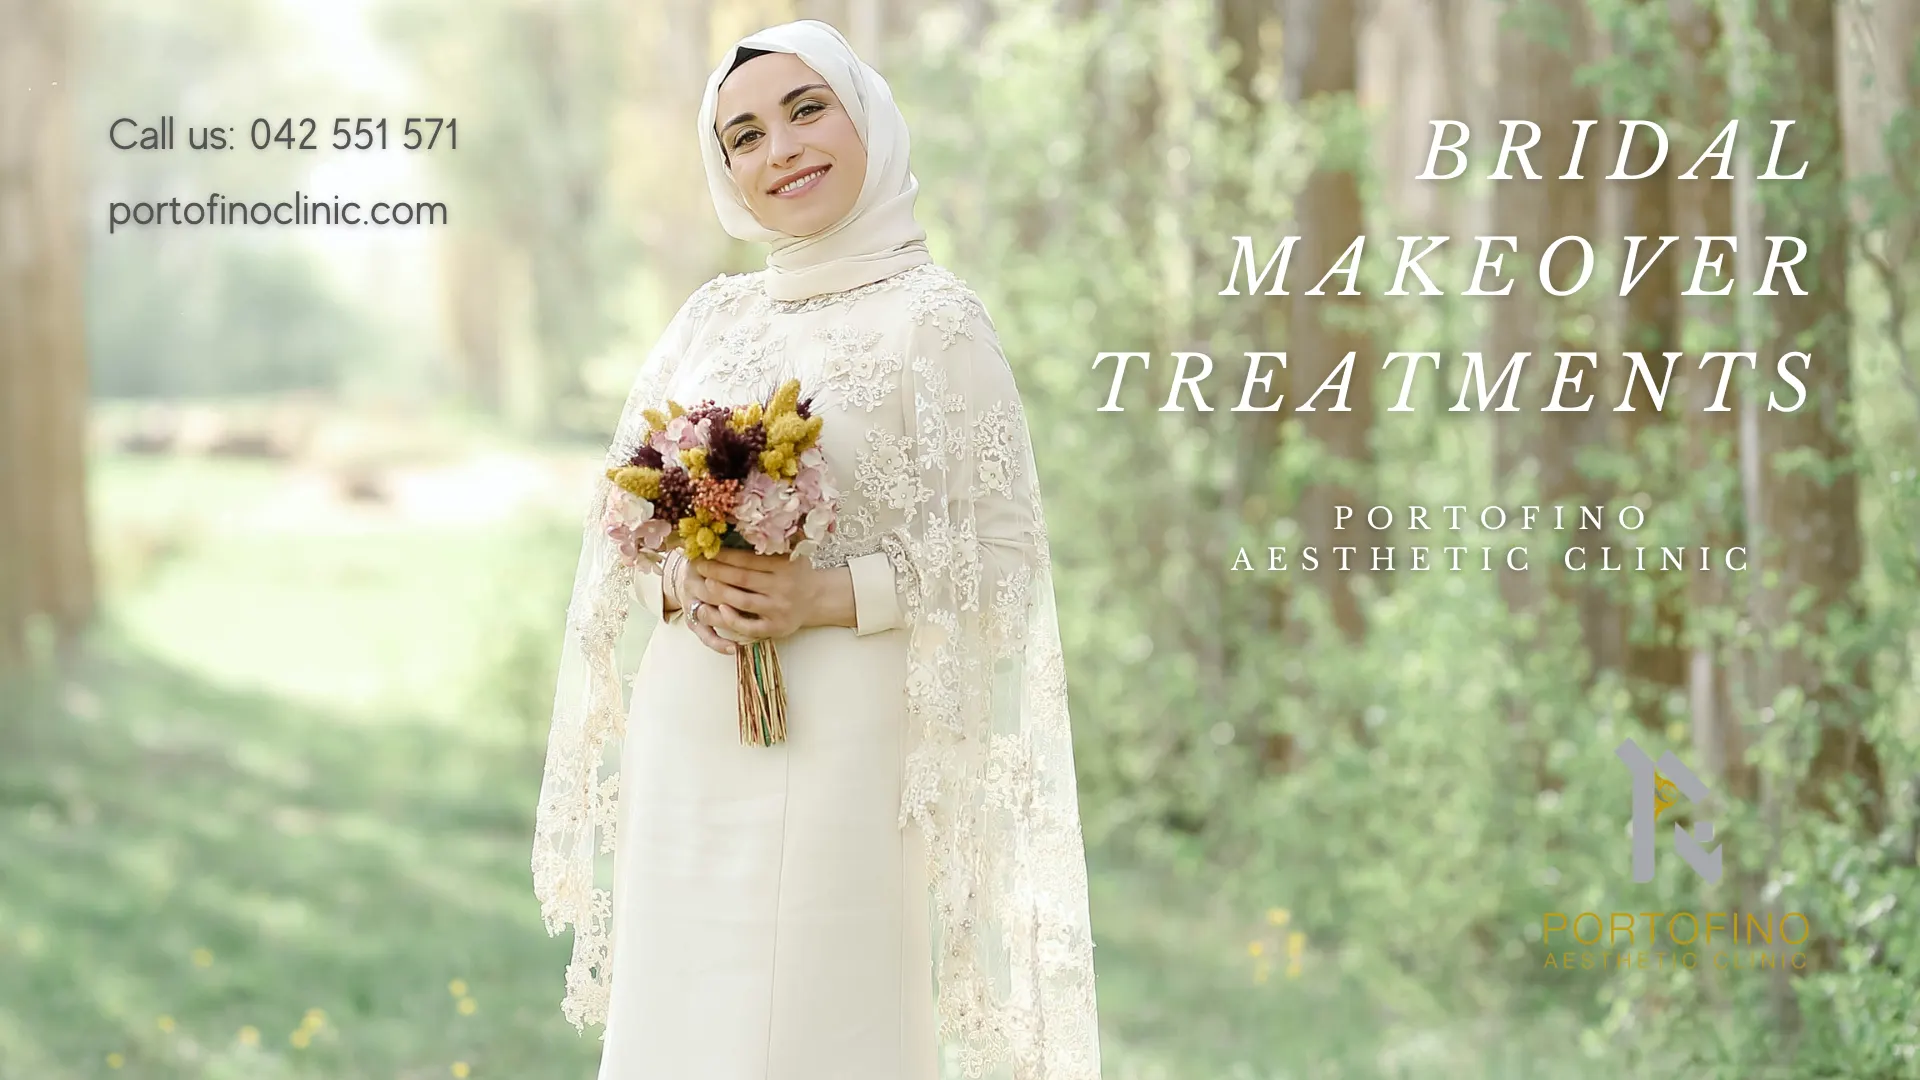 Bridal Makeover Packages- Portofino Aesthetic Clinic